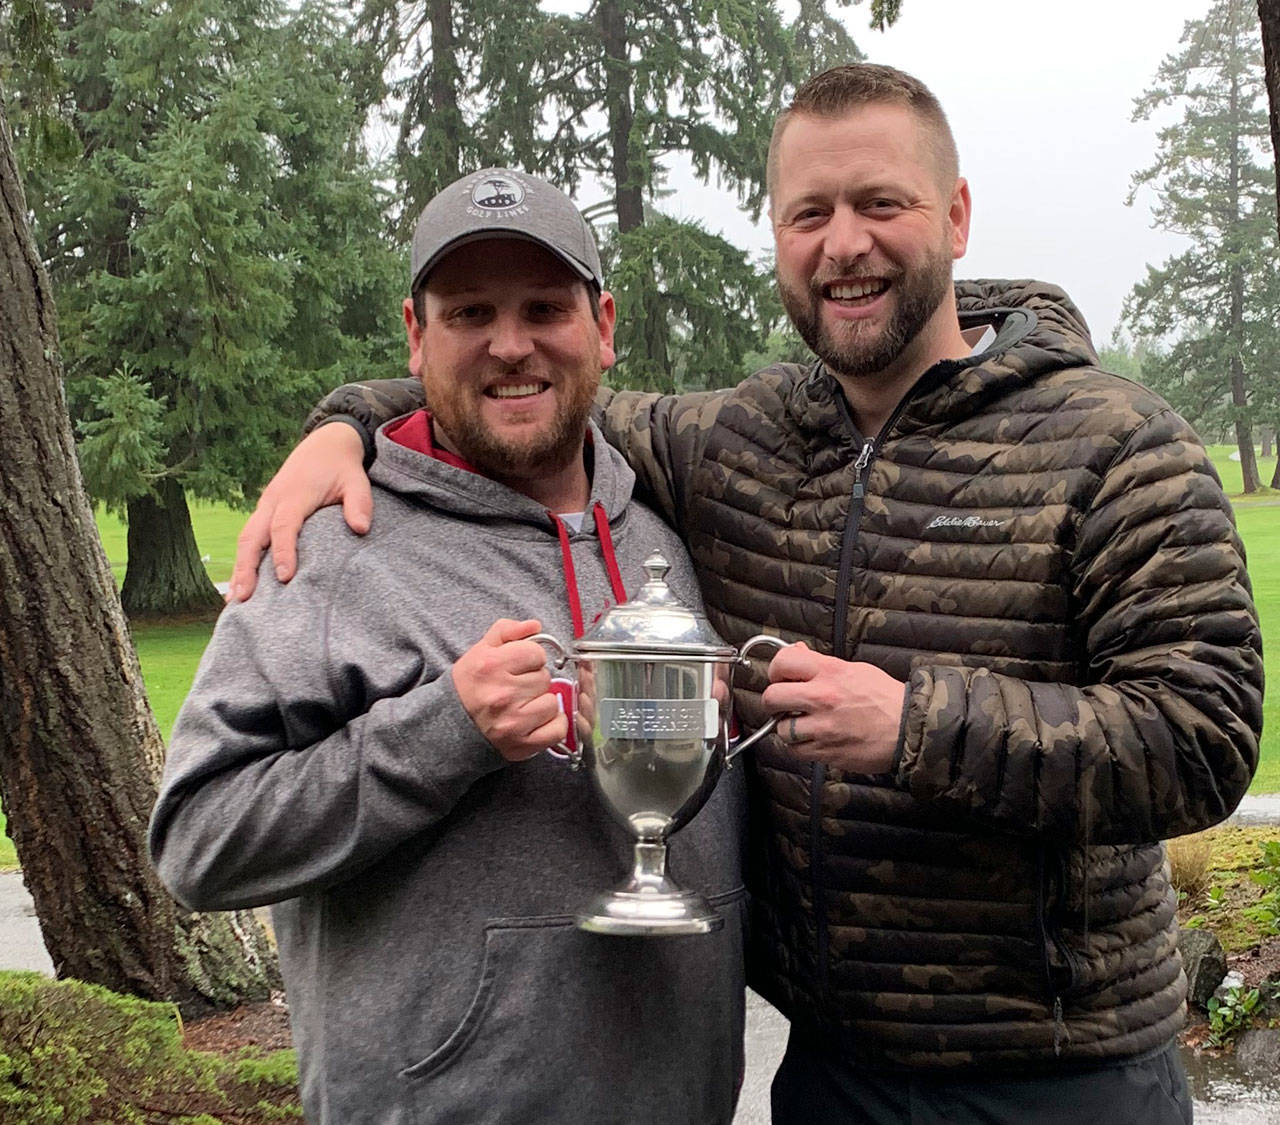 Kyler McCaslin, left, and Chad Wagner, who took low net and low gross honors respectively, helped lead Team Wagner to a win in the Battle at Bandon competition earlier this month. Submitted photo